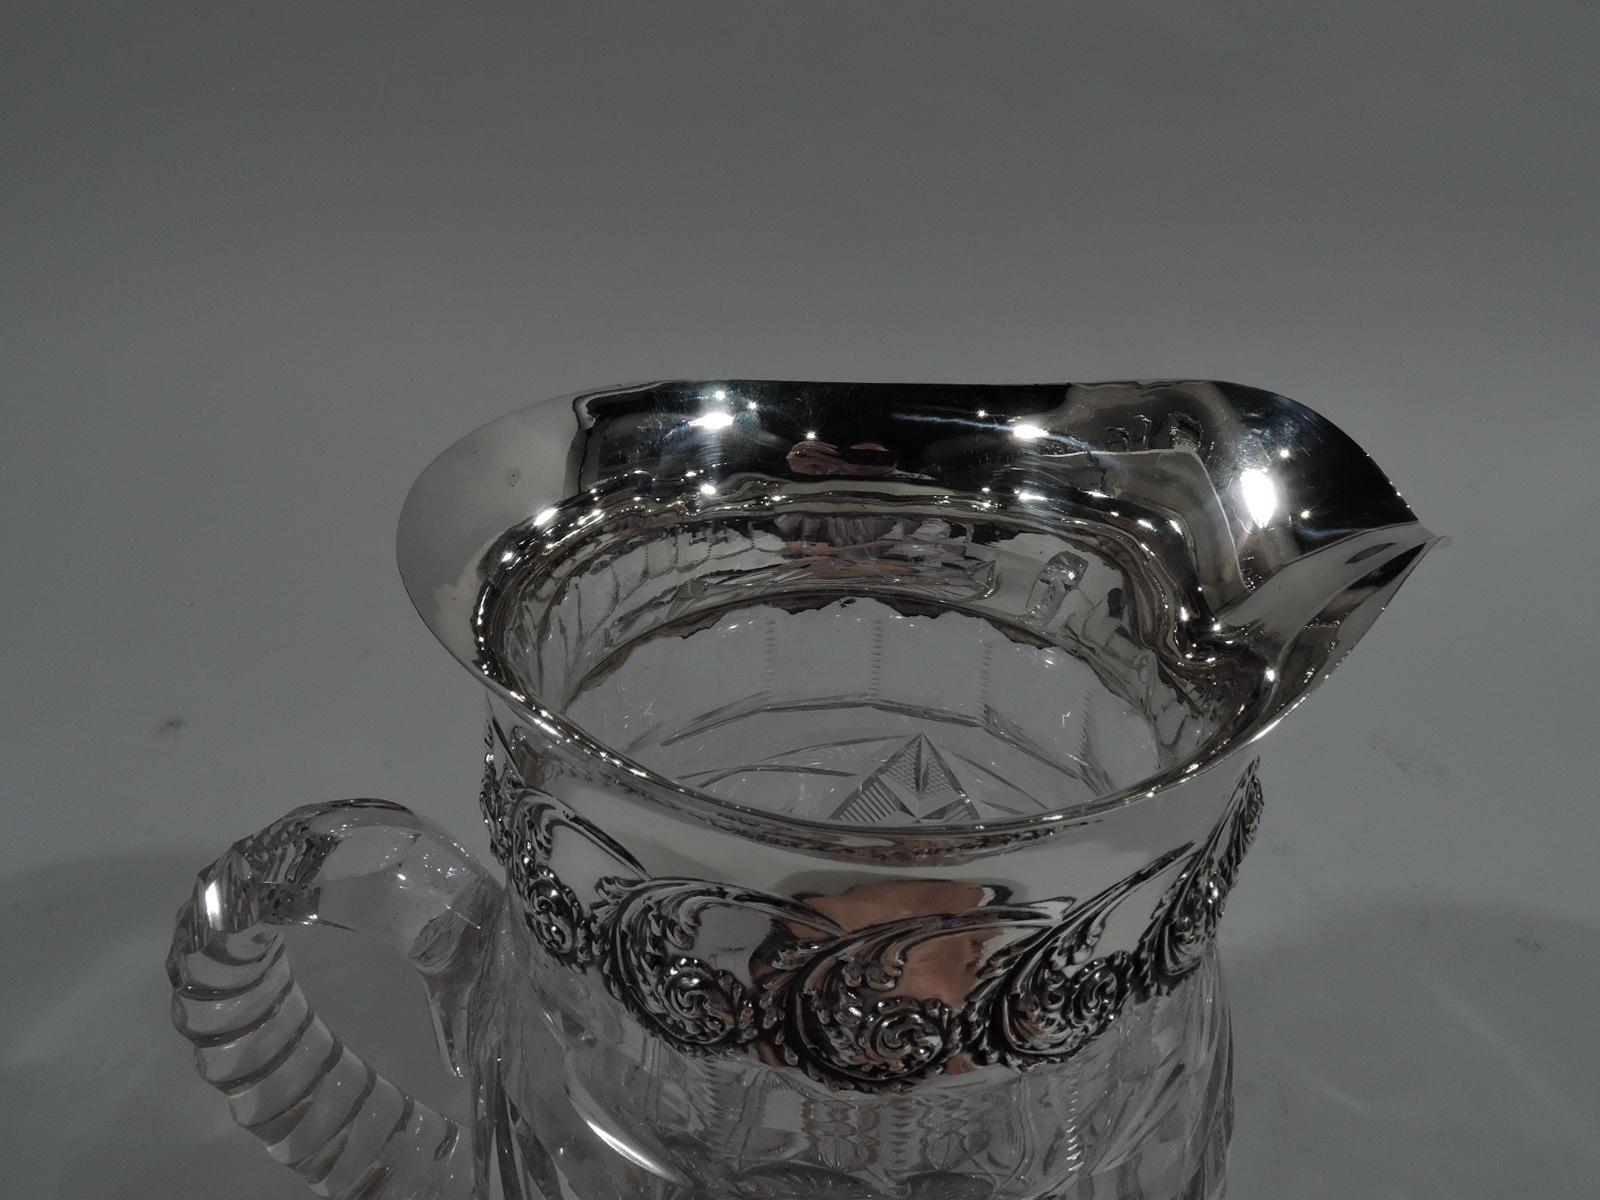 Edwardian cut-glass water pitcher with sterling silver collar. Curved body with cut geometric and plant ornament and faceted c-scroll handle. Collar has band of volute scrolls with flowers and leaves. Fully marked including stamp for Adelphi, a New